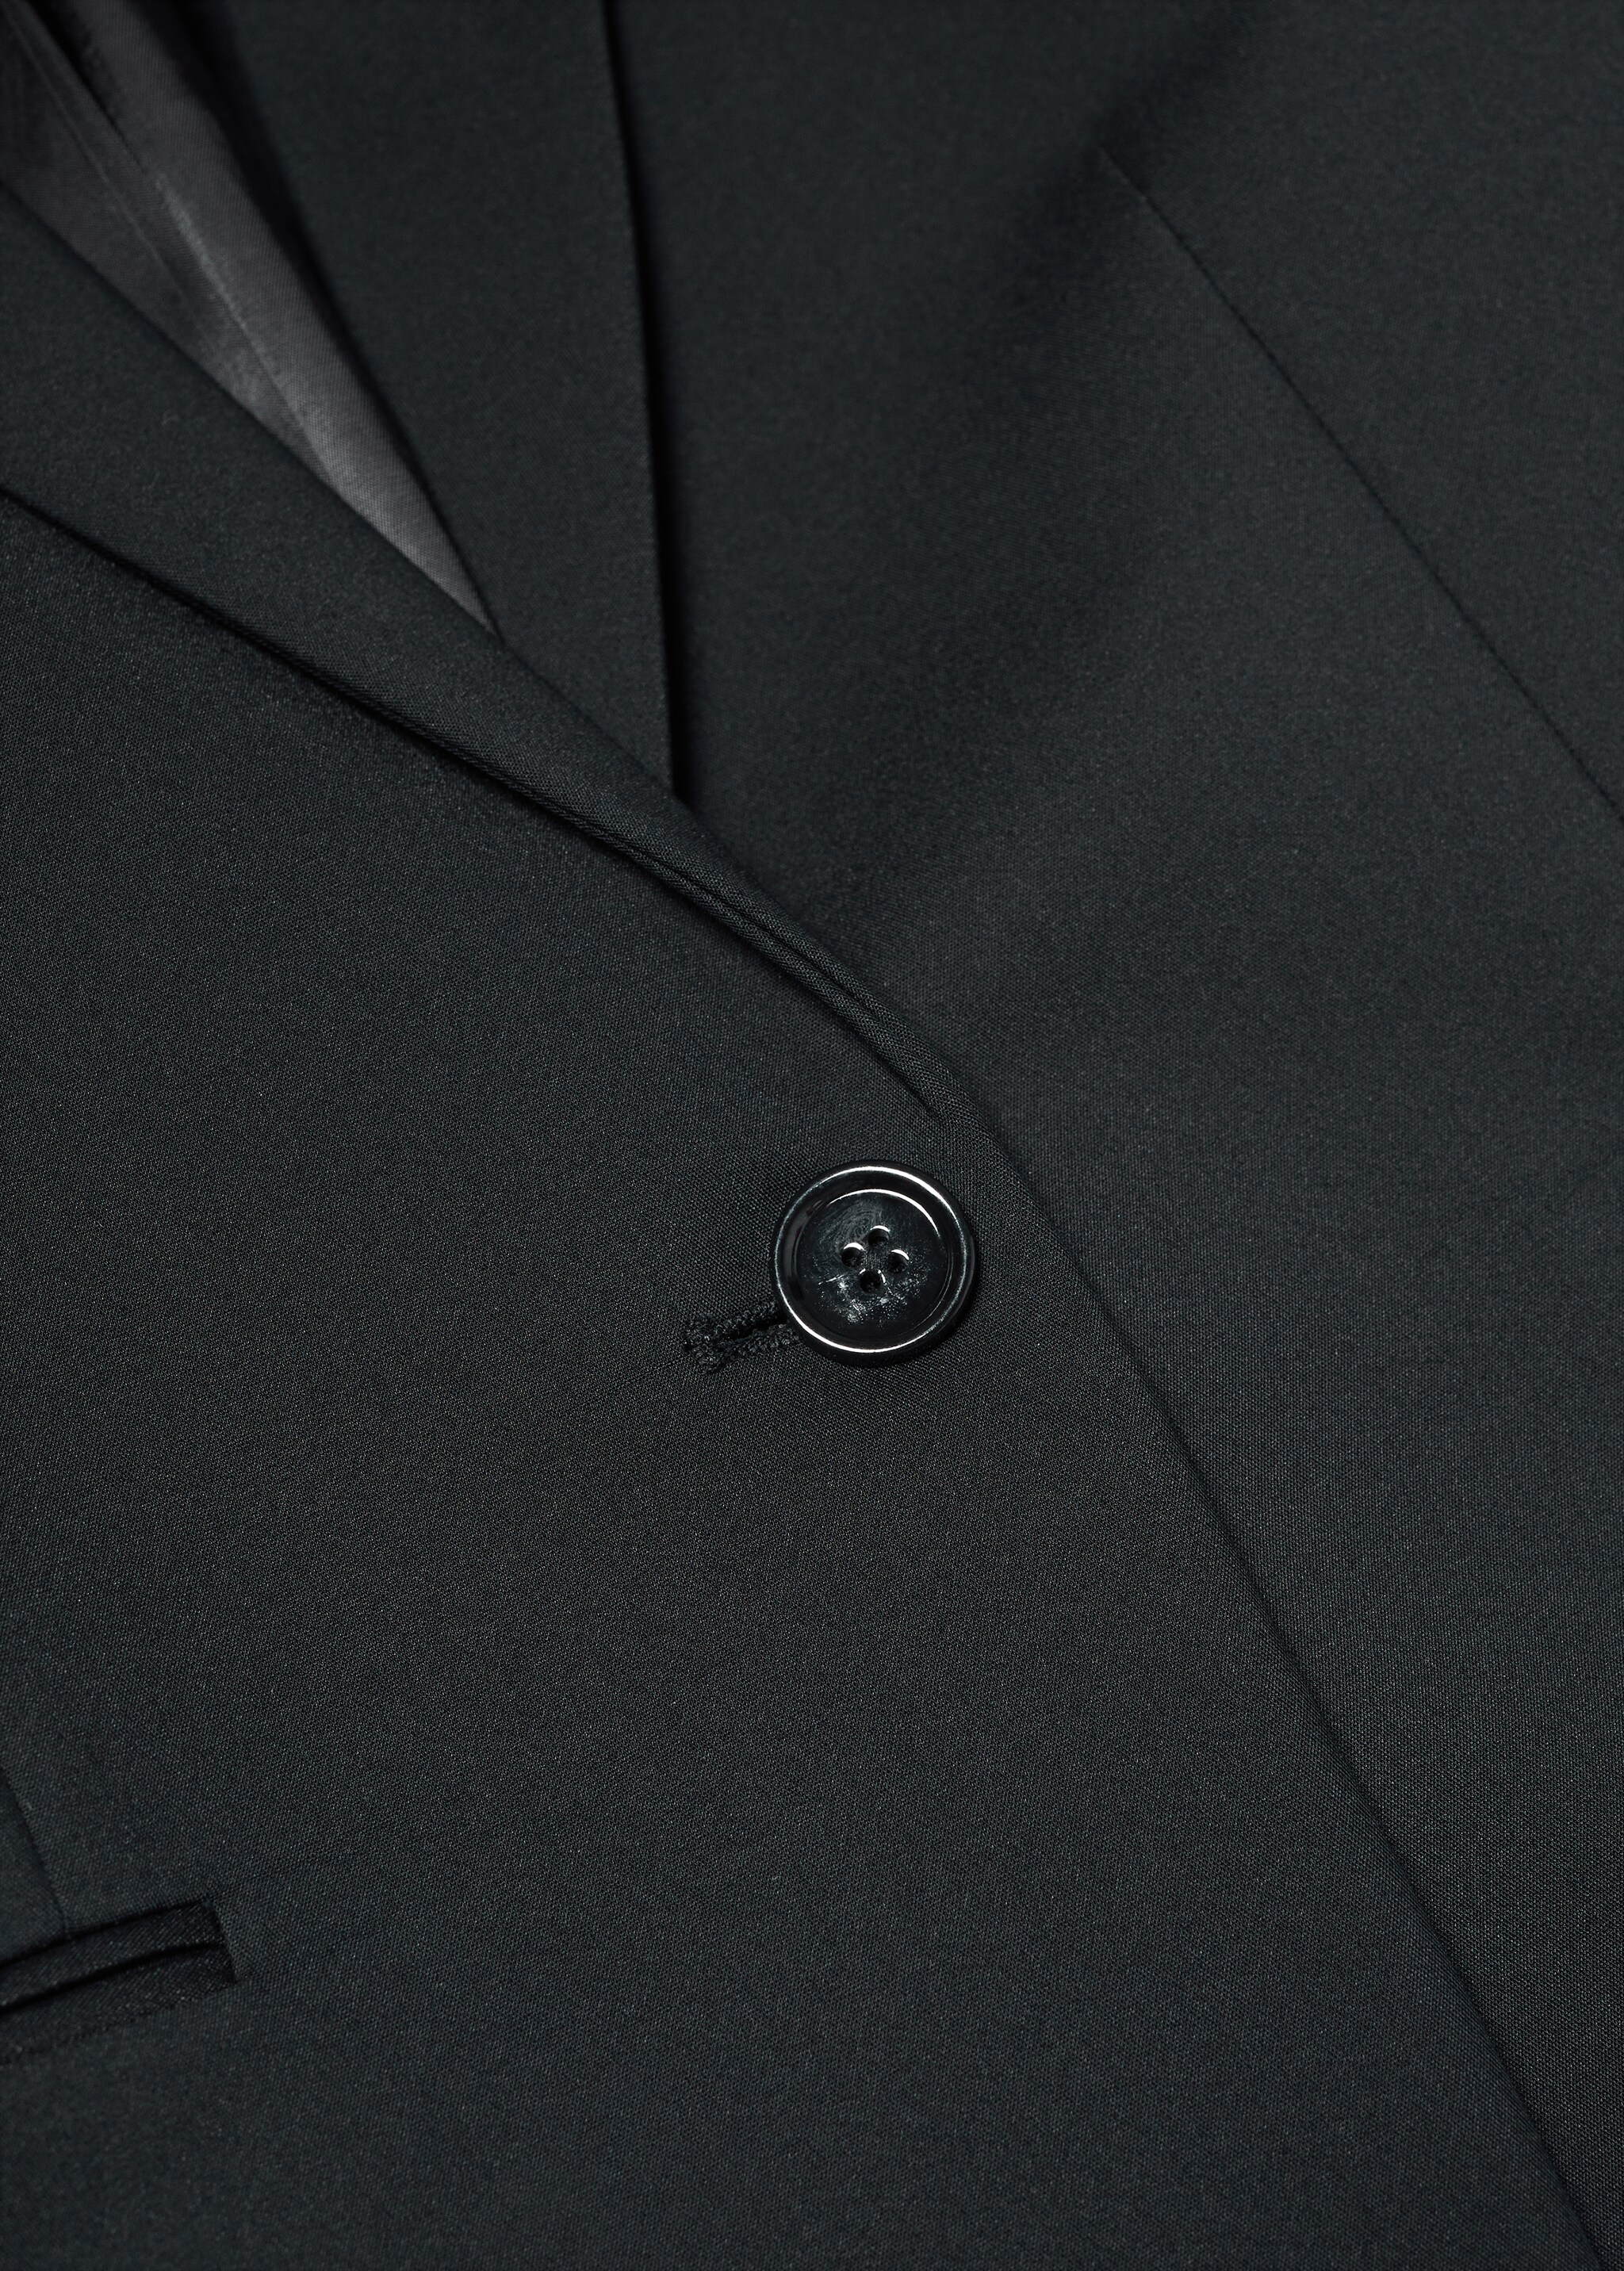 Fitted suit jacket with pocket  - Details of the article 8